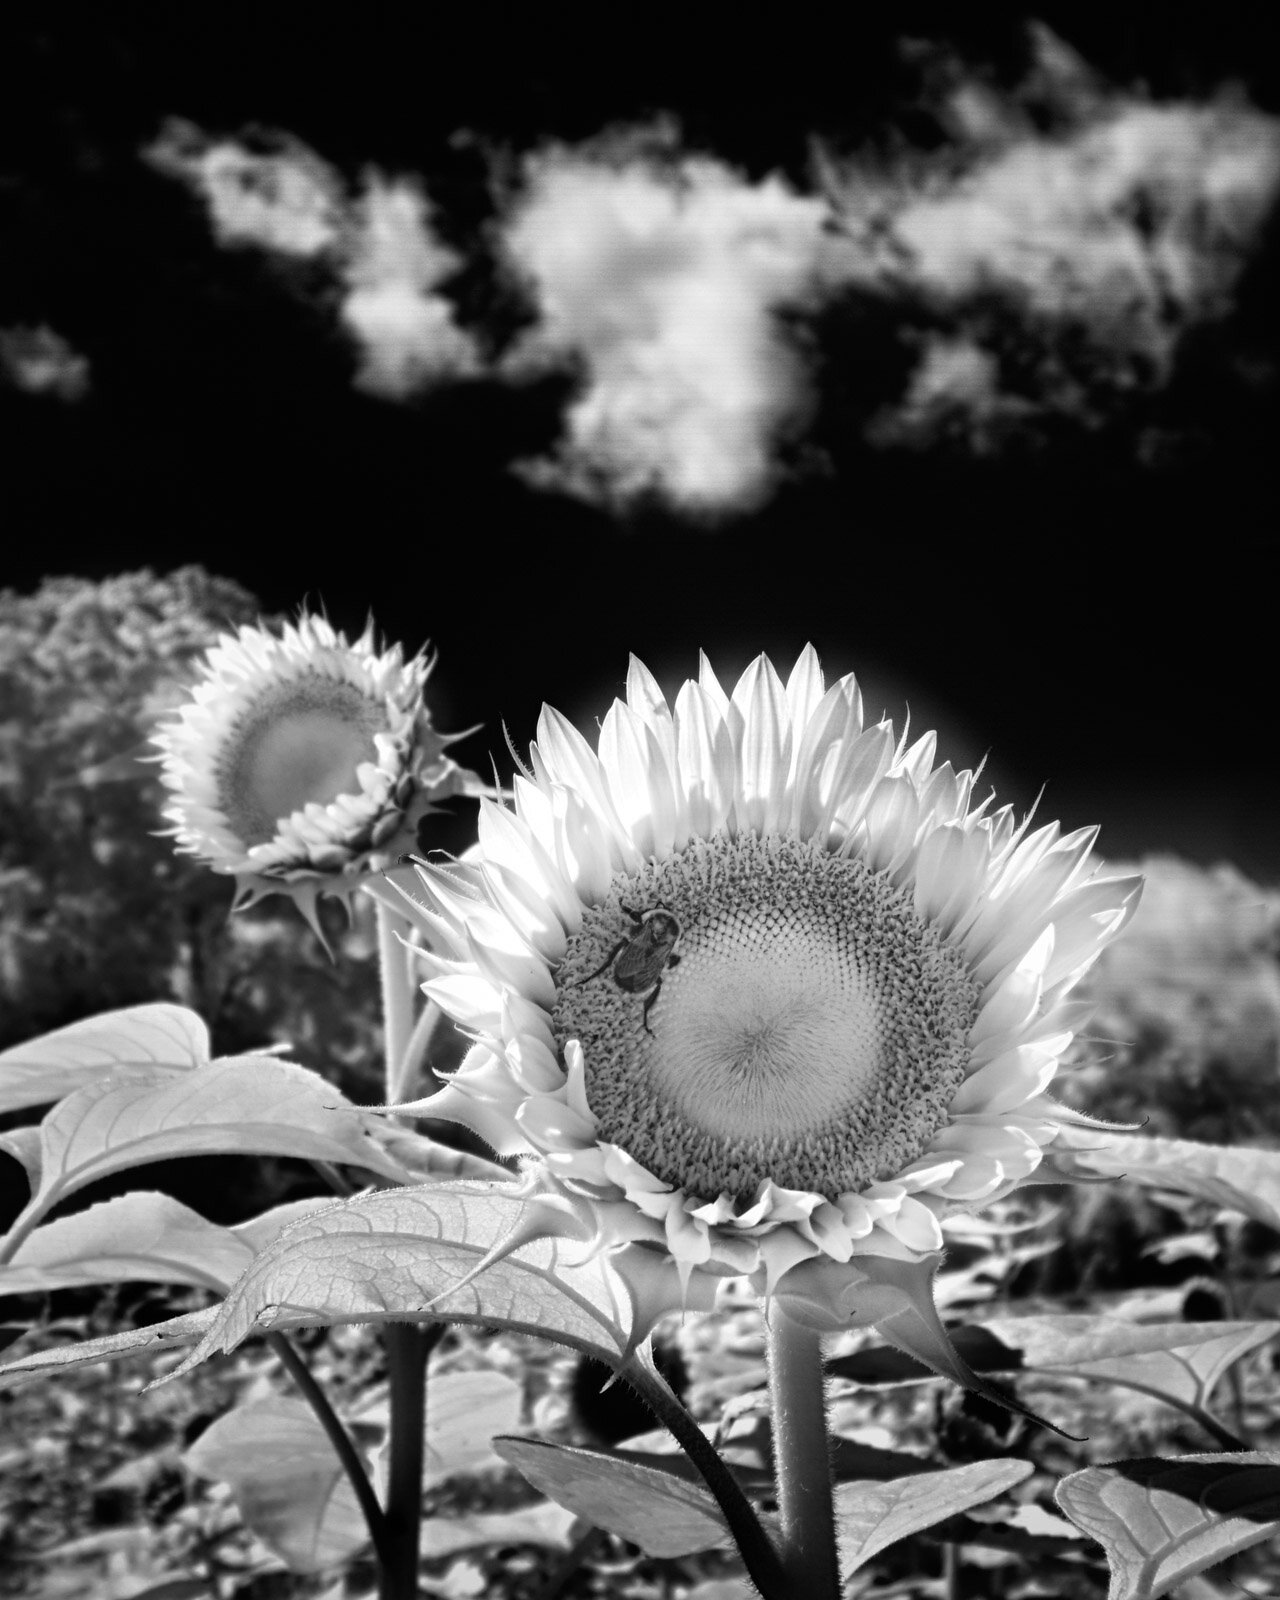 Infrared Sunflowers in Lakeville MA